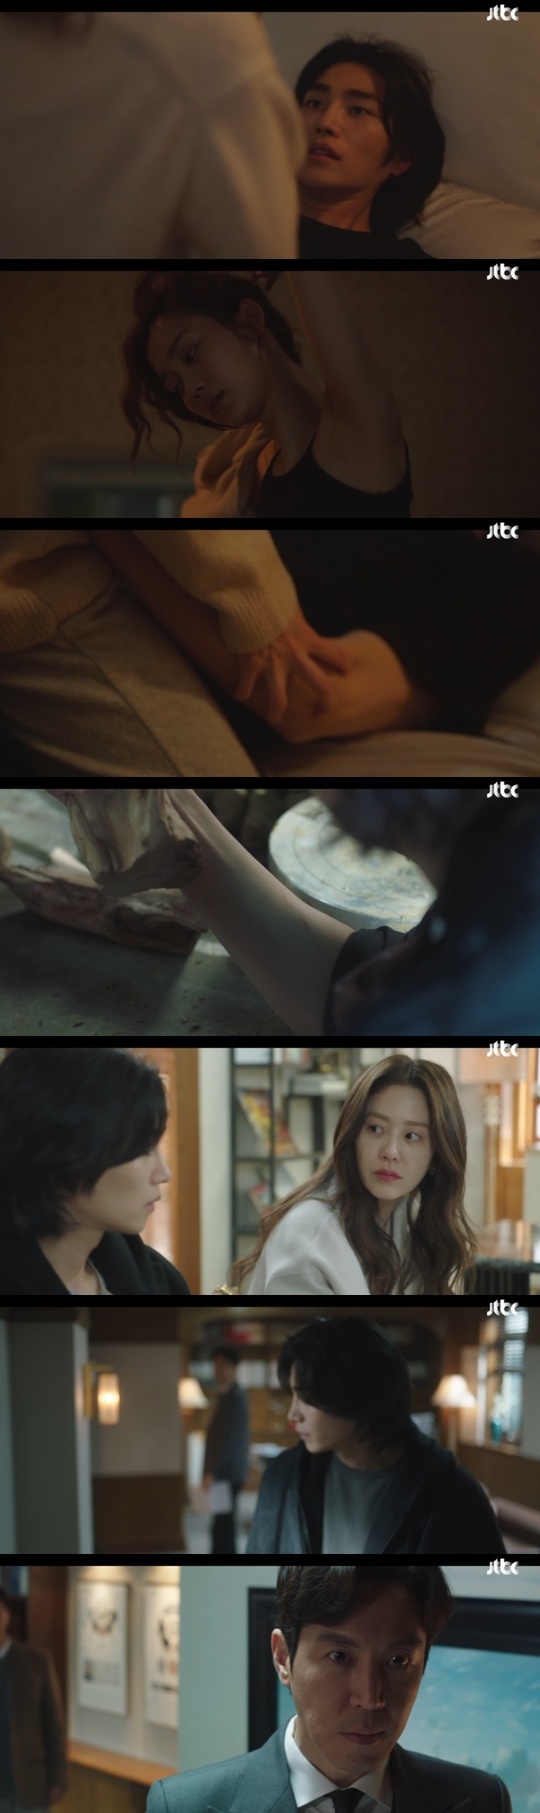 Shin Hyun-bin continues his obsession with Jae-young KimIn the seventh episode of the JTBC drama The Man Who Resembls You (played by Yu Bora and directed by Lim Hyun-wook), which aired on November 3, the figure of the old Umizaru (Shin Hyun-bin), who is obsessed with anxiety about losing Seo Woo-jae (Jae-young Kim) once again, was portrayed.On the same day, Umizaru became anxiety when Seo Woo-jae returned home in a car of Jung Hee-joo (Go Hyun-jung) and Ahn Hyun-sung (Choi Won-young).The former Umizaru tells Seo Woo Jae why he keeps bumping into Jung Hee-joo and Ahn Hyun-sung. They can say something that they do not like and make you hate me.Are you sure you dont? he said.Old Umizaru released this sense of anxiety into the nights bed; Old Umizaru, as comfortingly, I didnt know.I am sorry I did not know, he said, hanging on to Seo Woo Jae, who apologized, and gave a deep kiss.Soon, Umizaru, who climbed on the body of Seo Woo, threw off his clothes and had a passionate sleep with Seo Woo.The old Umizaru scratched his forearm with his nails on the Seo Woo ash, revealing his obsession and possession.Then Umizaru also promoted a wedding ceremony with Seo Woo Jae.Seo Woo Jae said that he wanted to pay for the work, and he suggested, Lets get married with this money. Seo Woo Jae tried to smile as if he did not want to, but former Umizaru said, I called people, took pictures,I want you to know were married. I want to be congratulated. Ill be congratulated by people.Regardless of the doctor of the former Umizaru, he immediately began to make concrete plans for marriage.At first, when both of them were rejected because they were not believers, the old Umizaru, who thought of the mass of marriage in the cathedral, promoted a wedding at the Fine Gallery.In the meantime, the former Umizaru told Lee Jung-eun (Kim Ho-jung), who was in charge of the Seo Woo-jae and Jung Hee-joo together, I am going to marry my seniors later.I can rent the exhibition hall here for a day. Seo Woo Jae was conscious of Jung Hee-joo.On the other hand, Jung Hee-joo deliberately gave a brighter look to the former Umizaru, Congratulations, live happily this time.At this time, Seo Woo Jae catches the word this time in detail, Happy this time. Why do you say that?Then, before that, we were unhappy. He asked me sharply and embarrassed Umizaru and Jung Hee-joo.On the other hand, Seo Woo Jae gradually approached the secrets of his memory while it disappeared.First, after checking the mail from the Embassy of the State Islands in his mailbox, Seo Woo-jae noticed that on July 20, 2014, the former Umizaru reported him missing.Previously, Umizaru said, I suddenly went to Ireland. He said, It is not suddenly to Seo Woo Jae, who is worried about why he went to Ireland.Since then, Seo Woo Jae has found that his hospital expenses have been resolved by supporting the social work of Ahn Hyun Sung, the husband of Jung Hee-joo.Seo Woo Jae found Choi Jun-young who moved himself to the hospital in search of Ahn Hyun-sung.Ahn Hyun-sung said, The foundation does not select a specific person as a applicant for social work support. However, Choi Jun-young was identified as an attorney of Ahn Hyun-sung.The secret that Ahn Hyun-sung is hiding has attracted viewers curiosity.